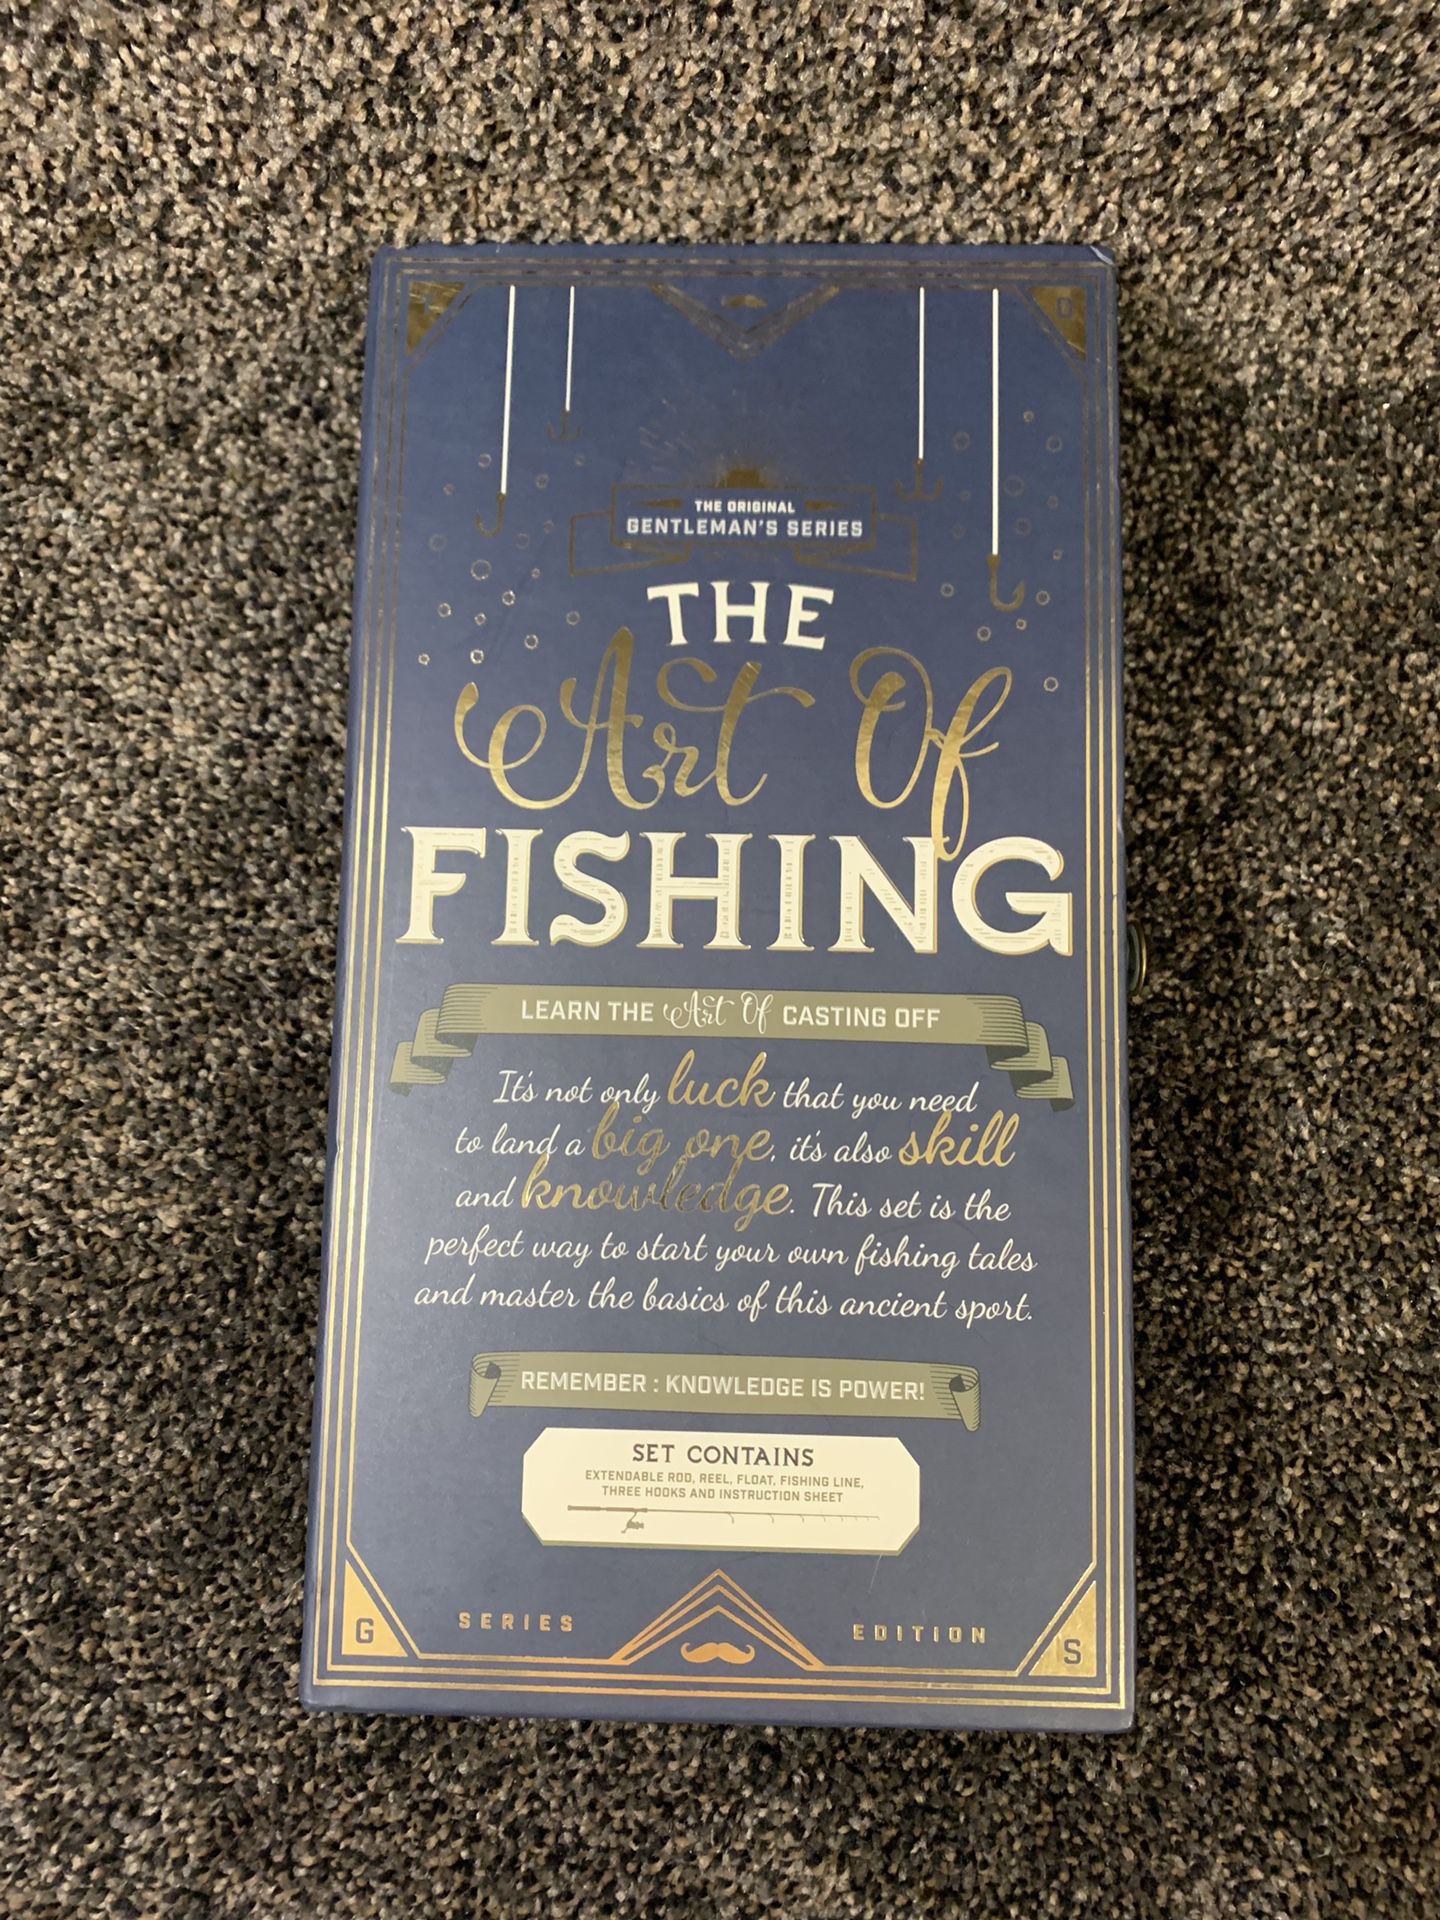 New in Box The Art of Fishing Gentleman's Series Set Details: Set Contains Extendable Rod, Reel, Float, Fishing Line, 3 Hooks and Instructions Sheet